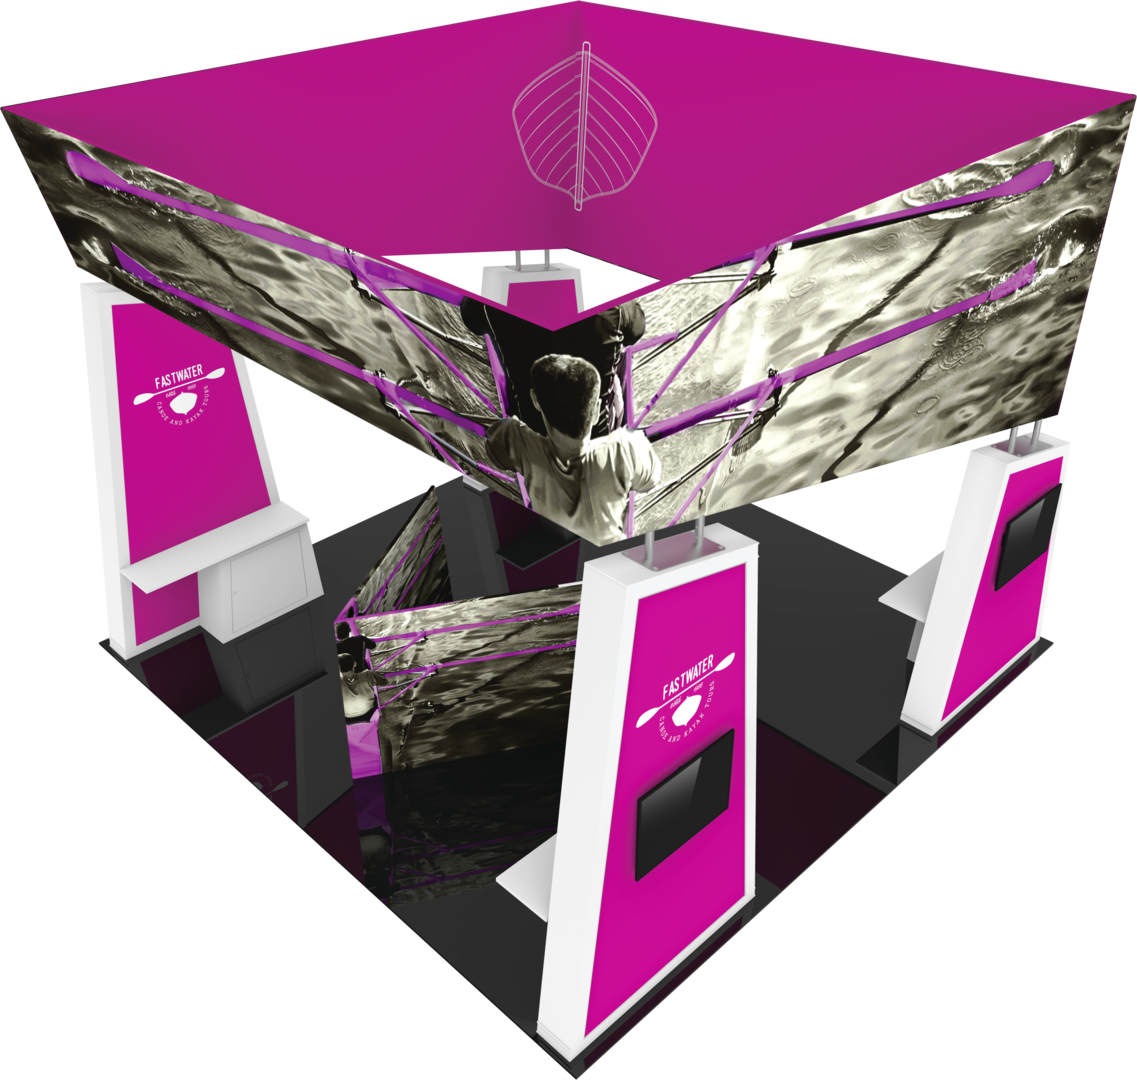 20ft x 20ft Formulate Fusion Island Booth Kit 11 Fabric Tower (Graphic Package)